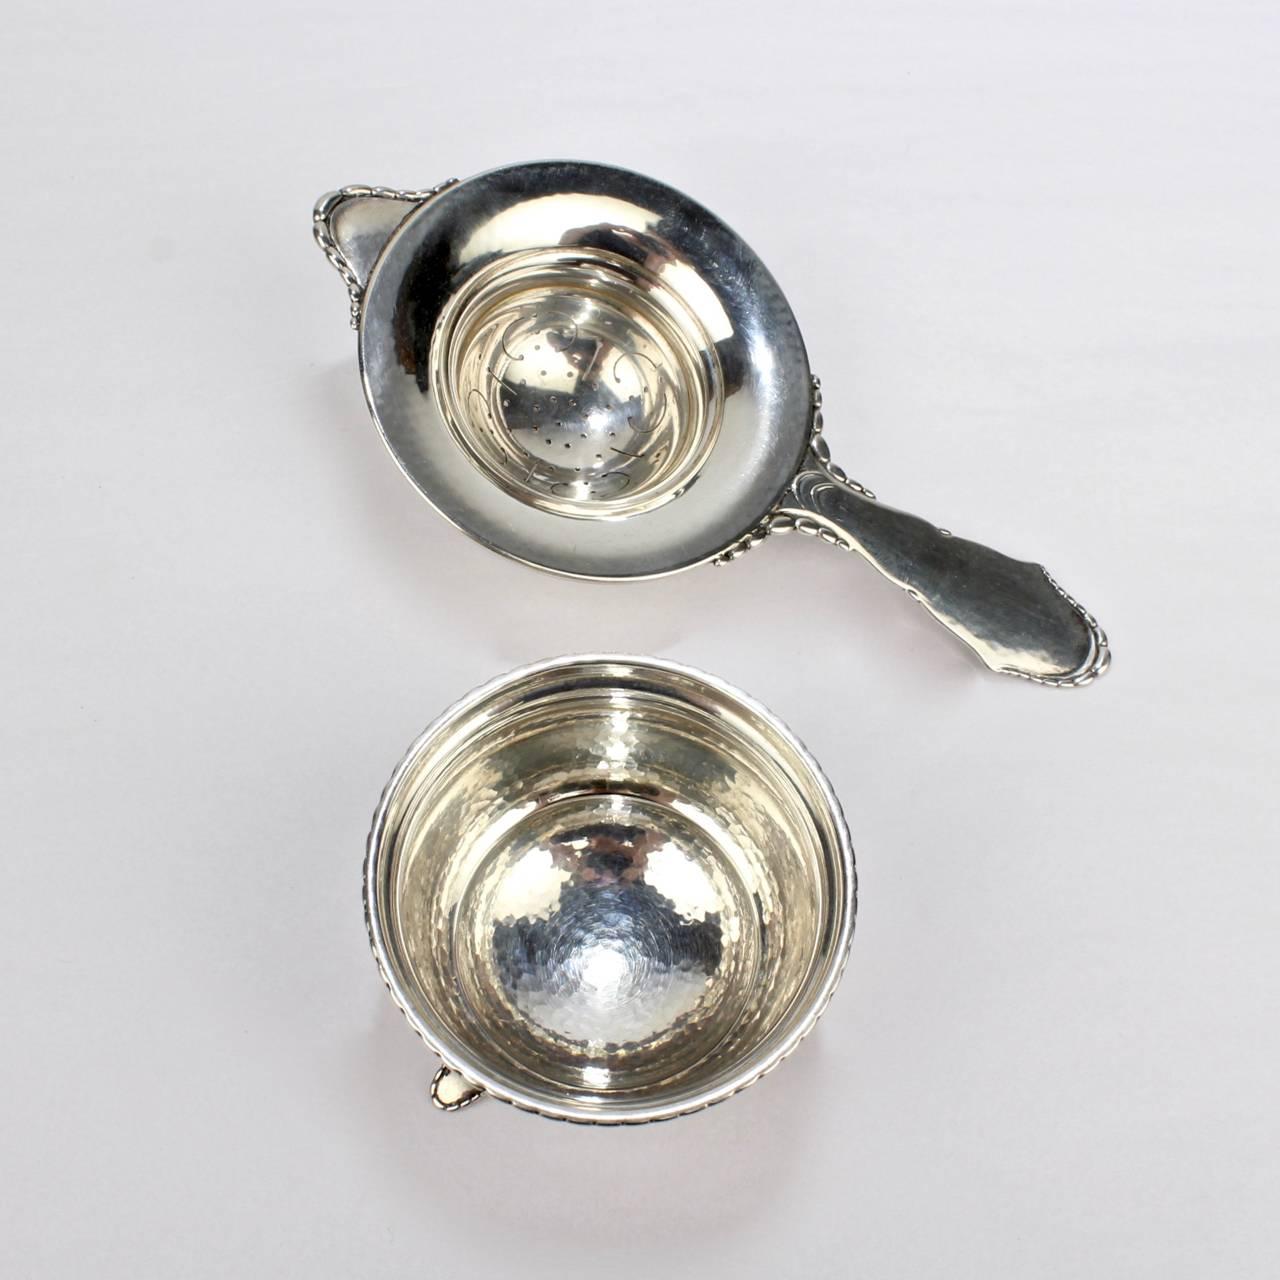 Mid-20th Century Danish Art Deco Hand-Hammered Sterling Silver Tea Strainer and Stand, 1930